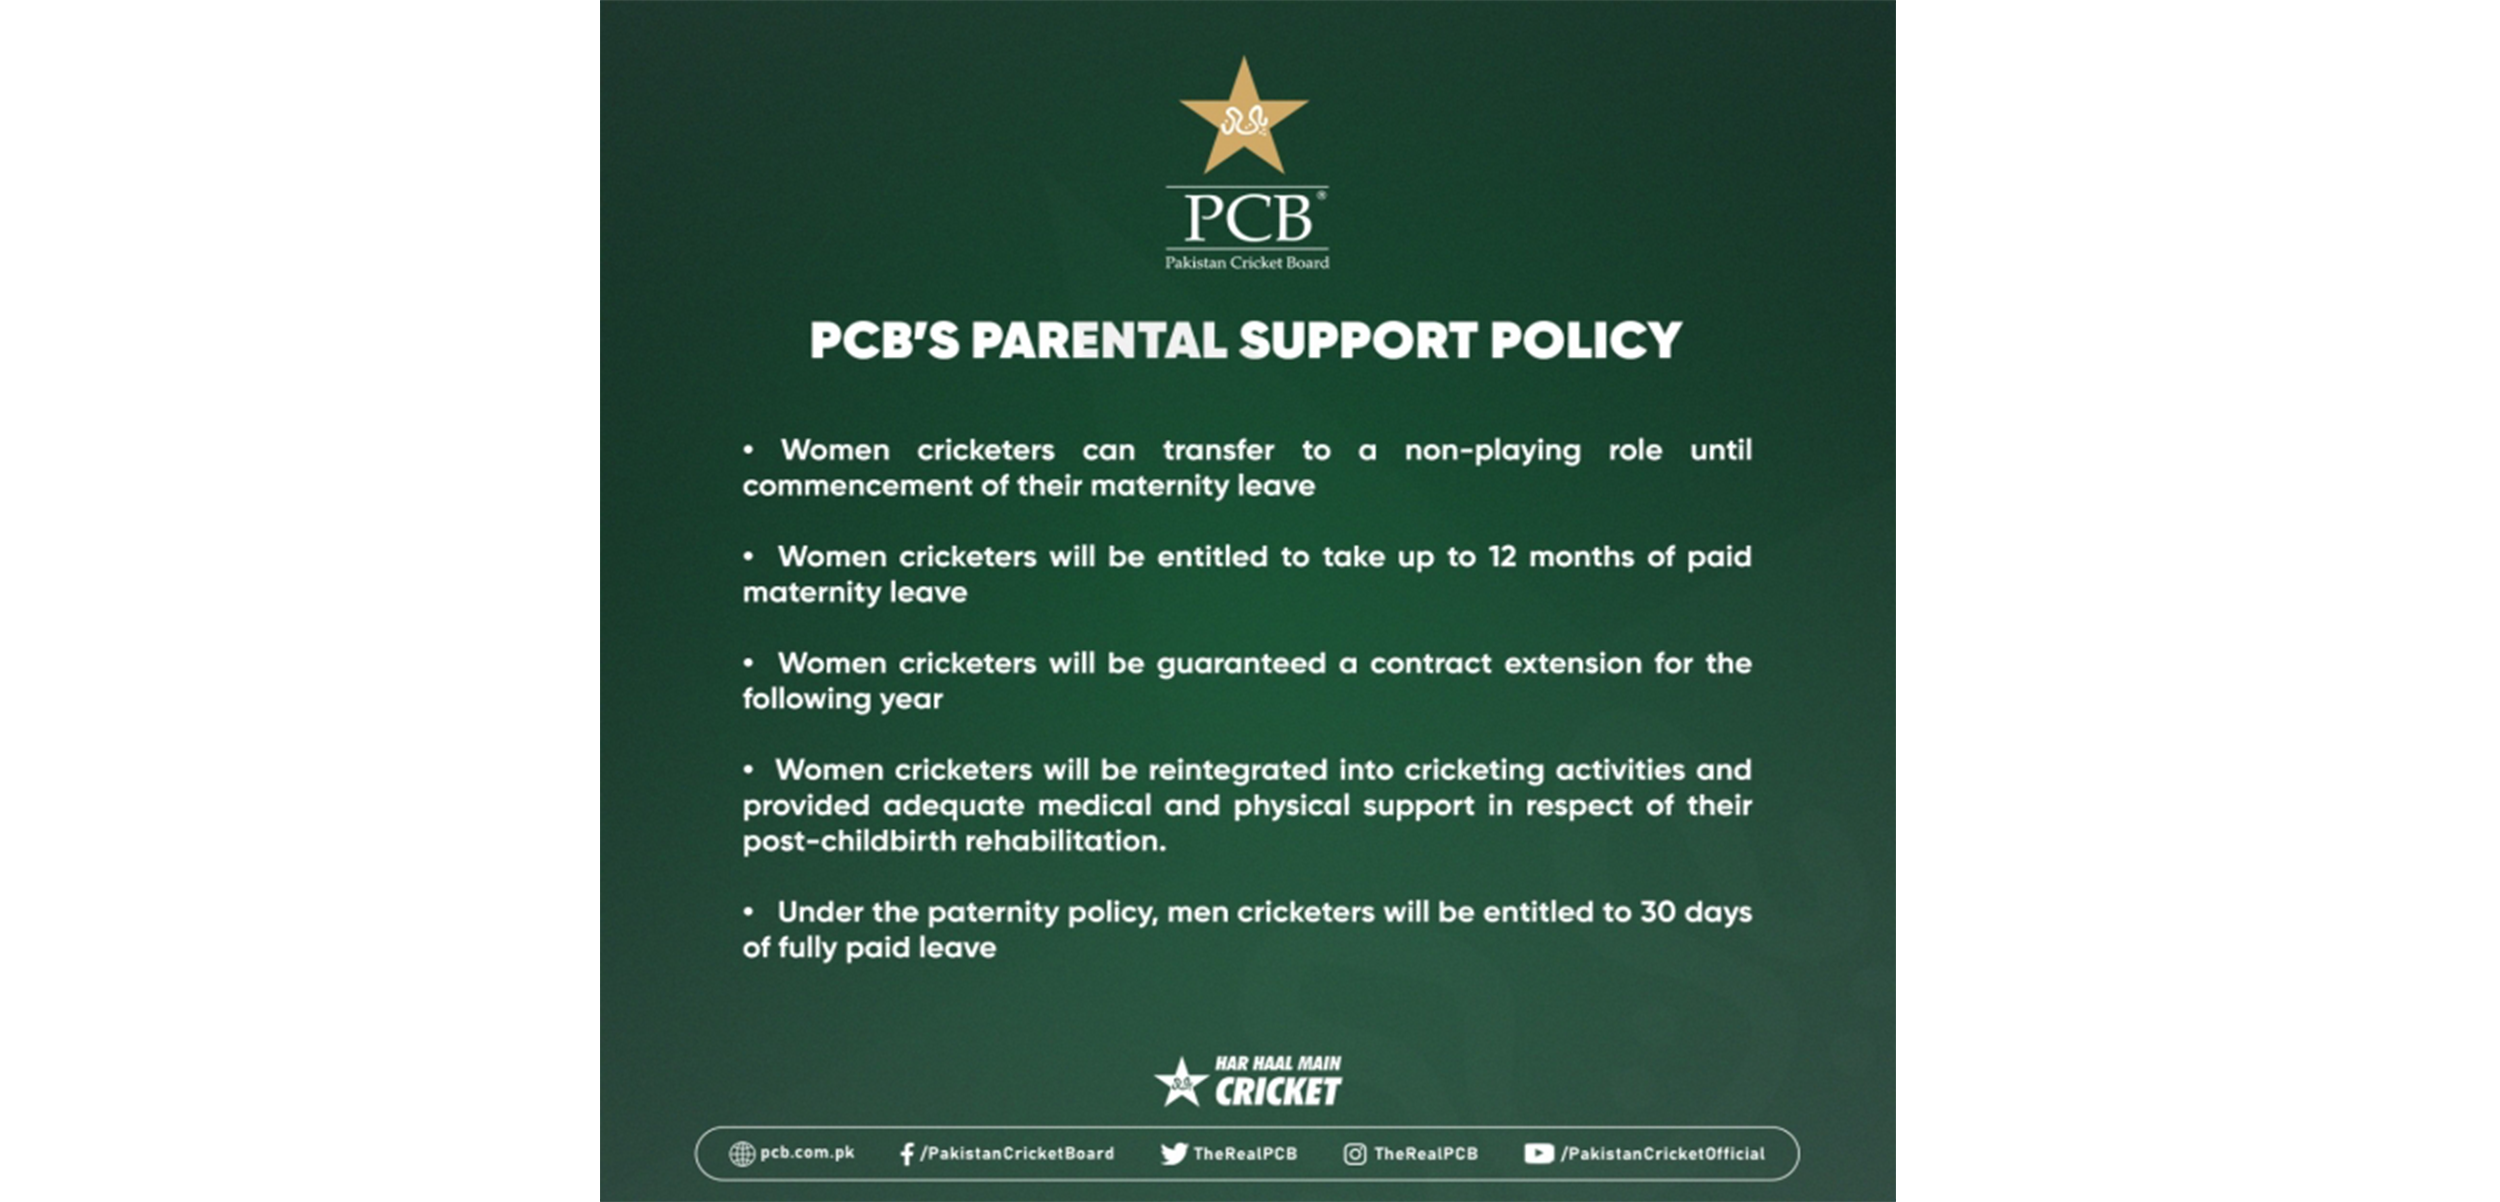 PCB unveils parental support policy for cricketers